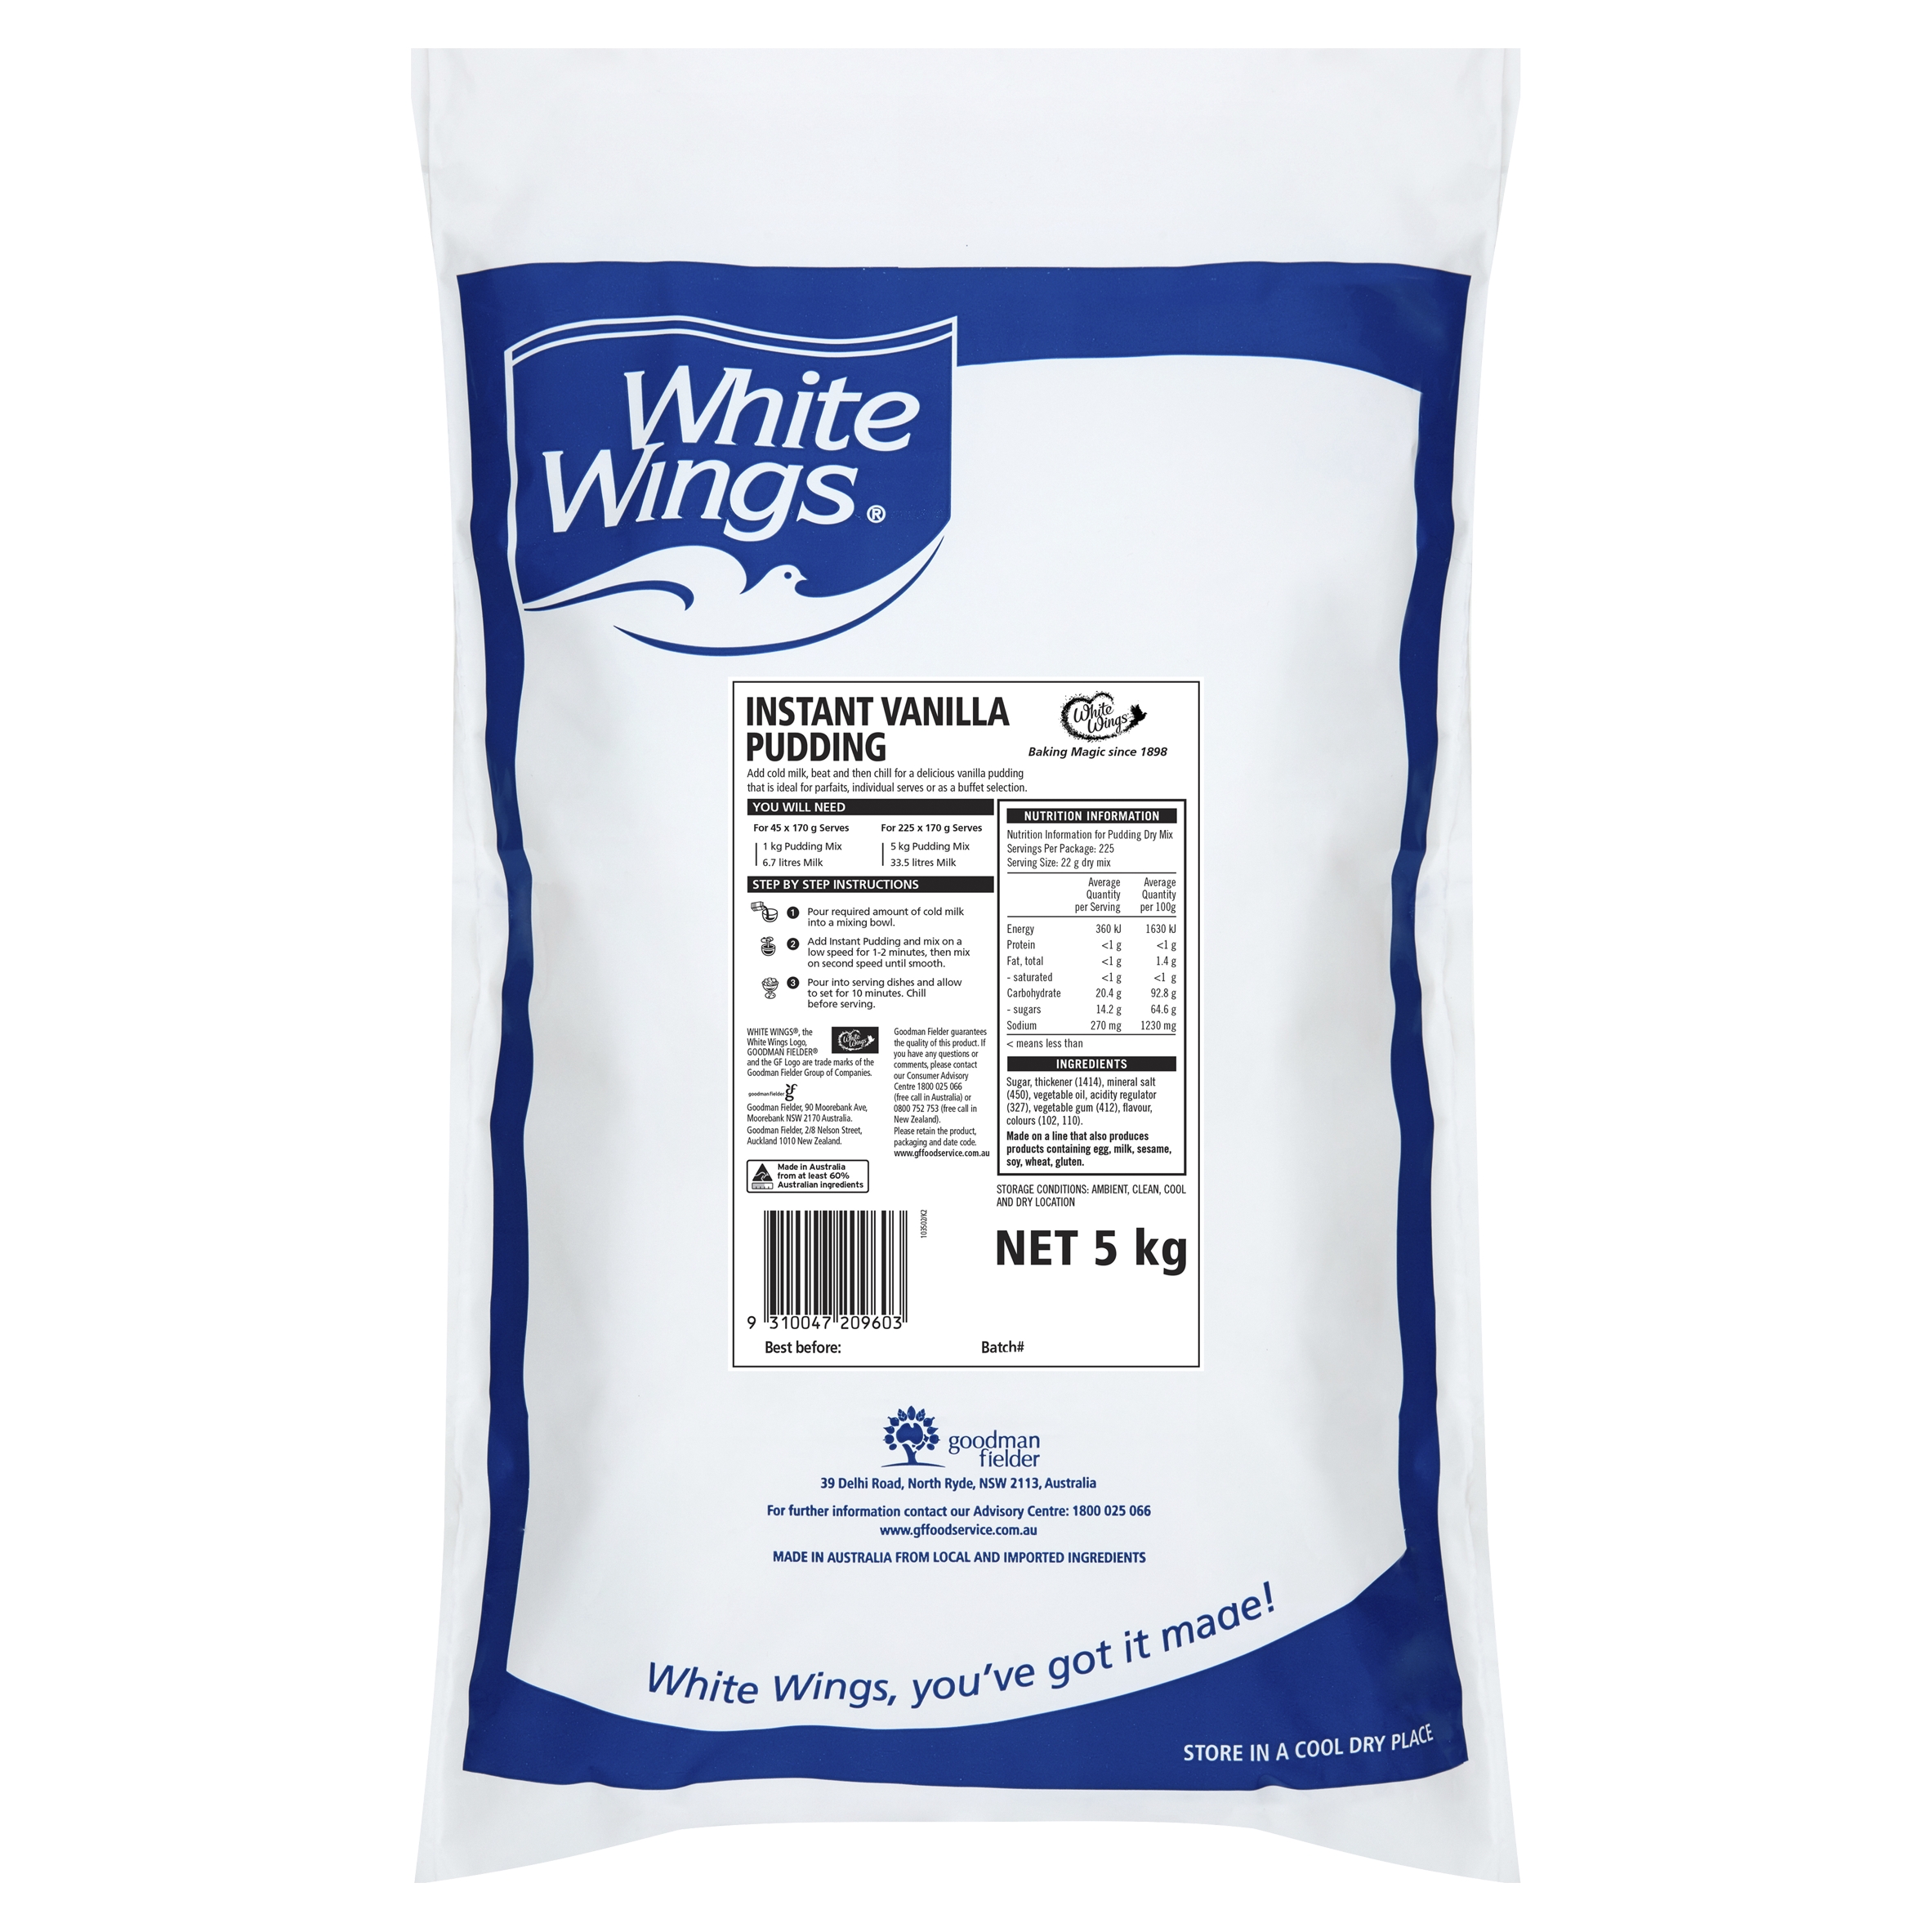 White Wings Instant Vanilla Pudding 5kg